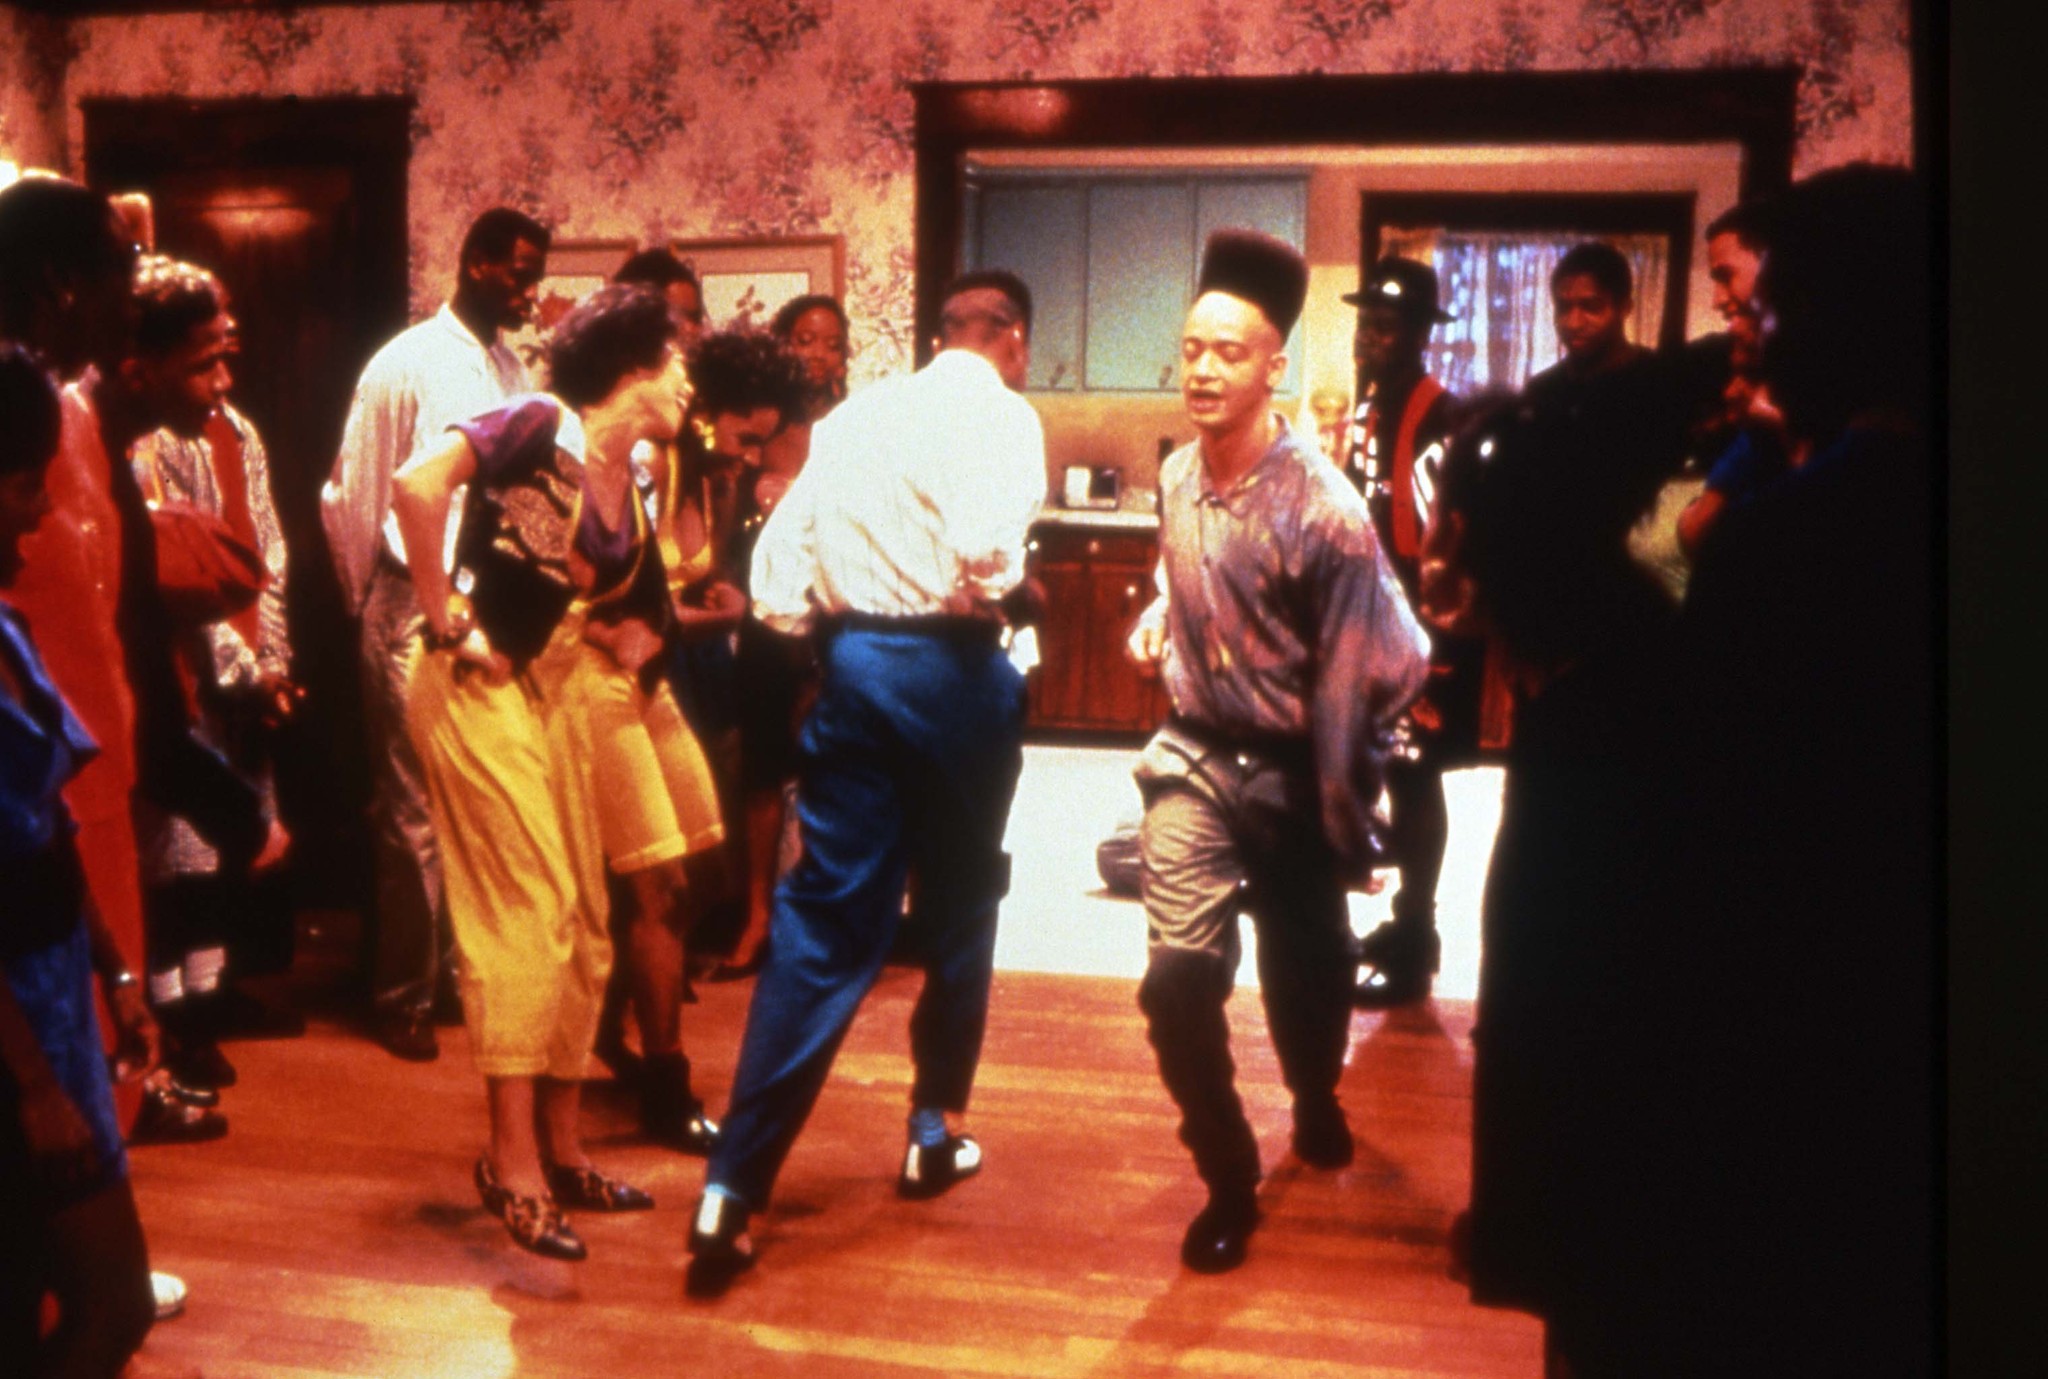 House Party (1990) Screenshot 3 